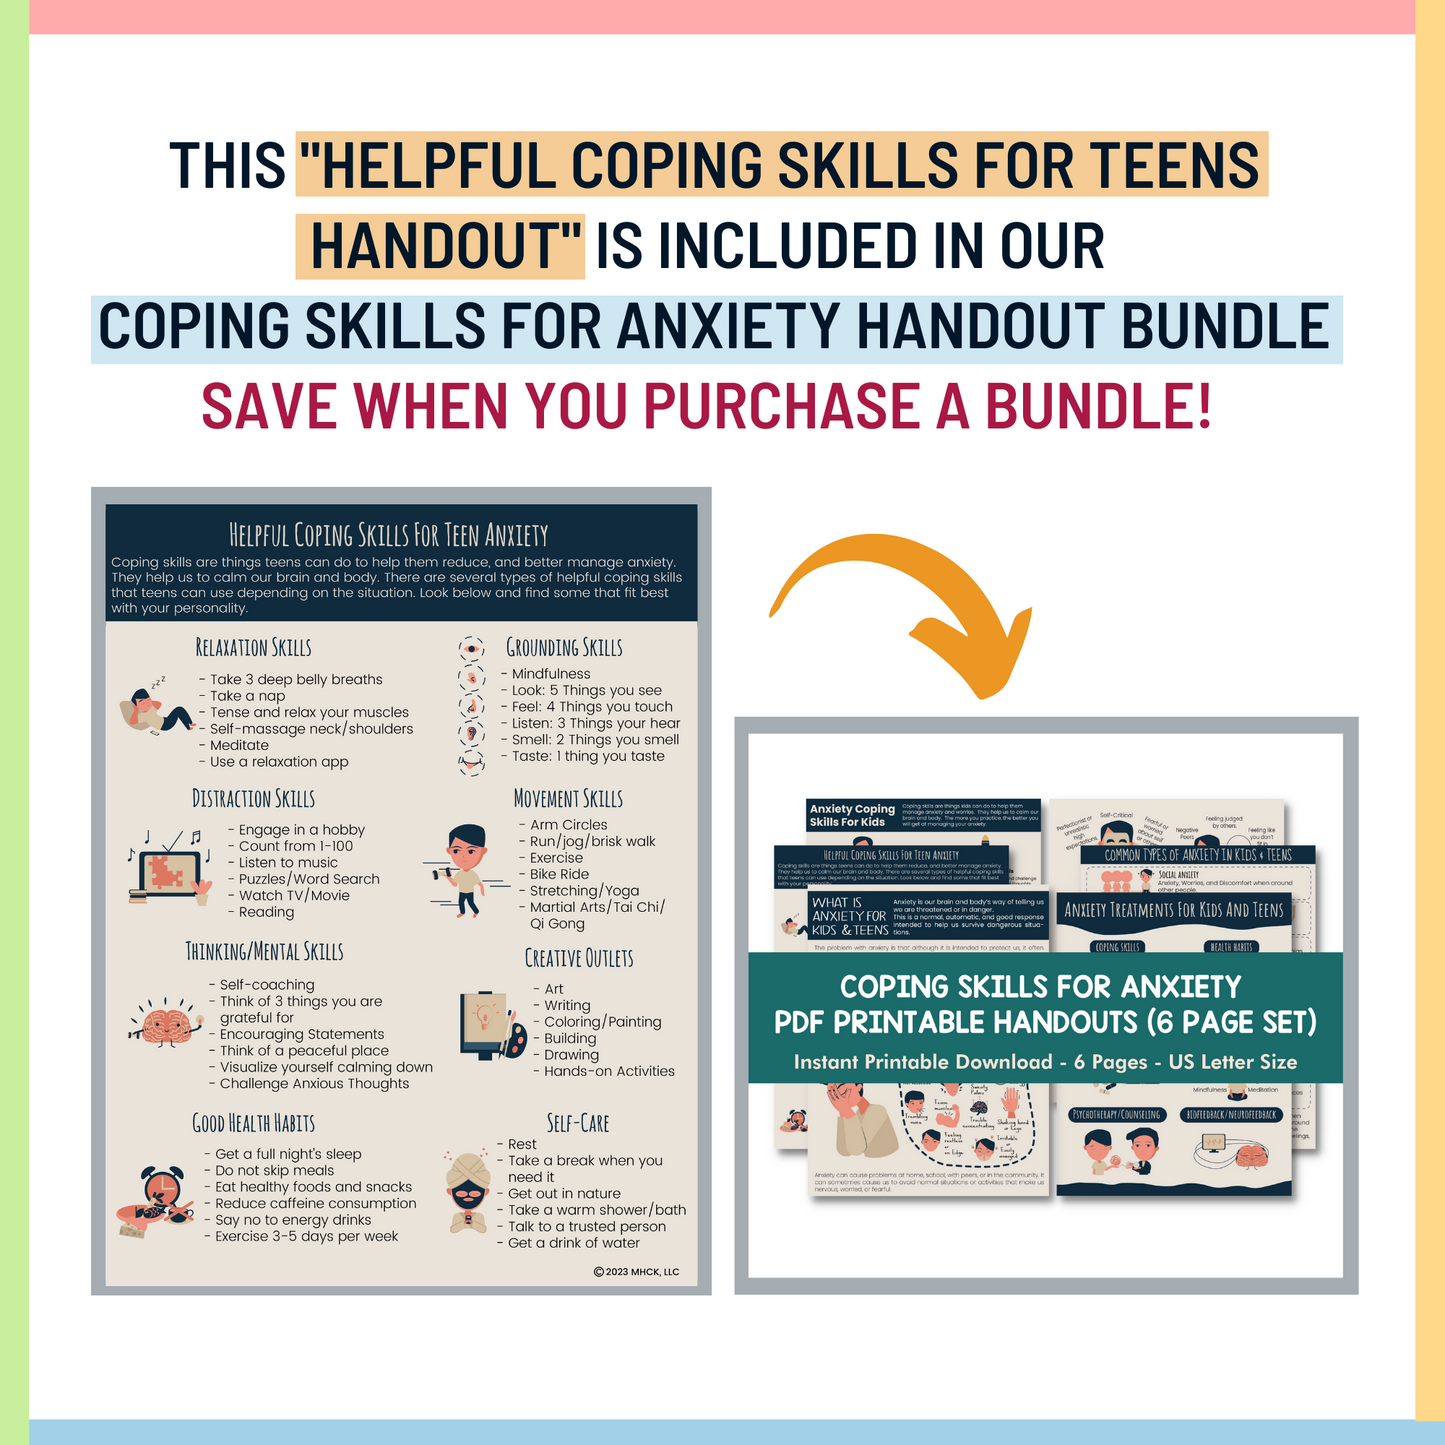 Helpful Coping Skills for Teen Anxiety